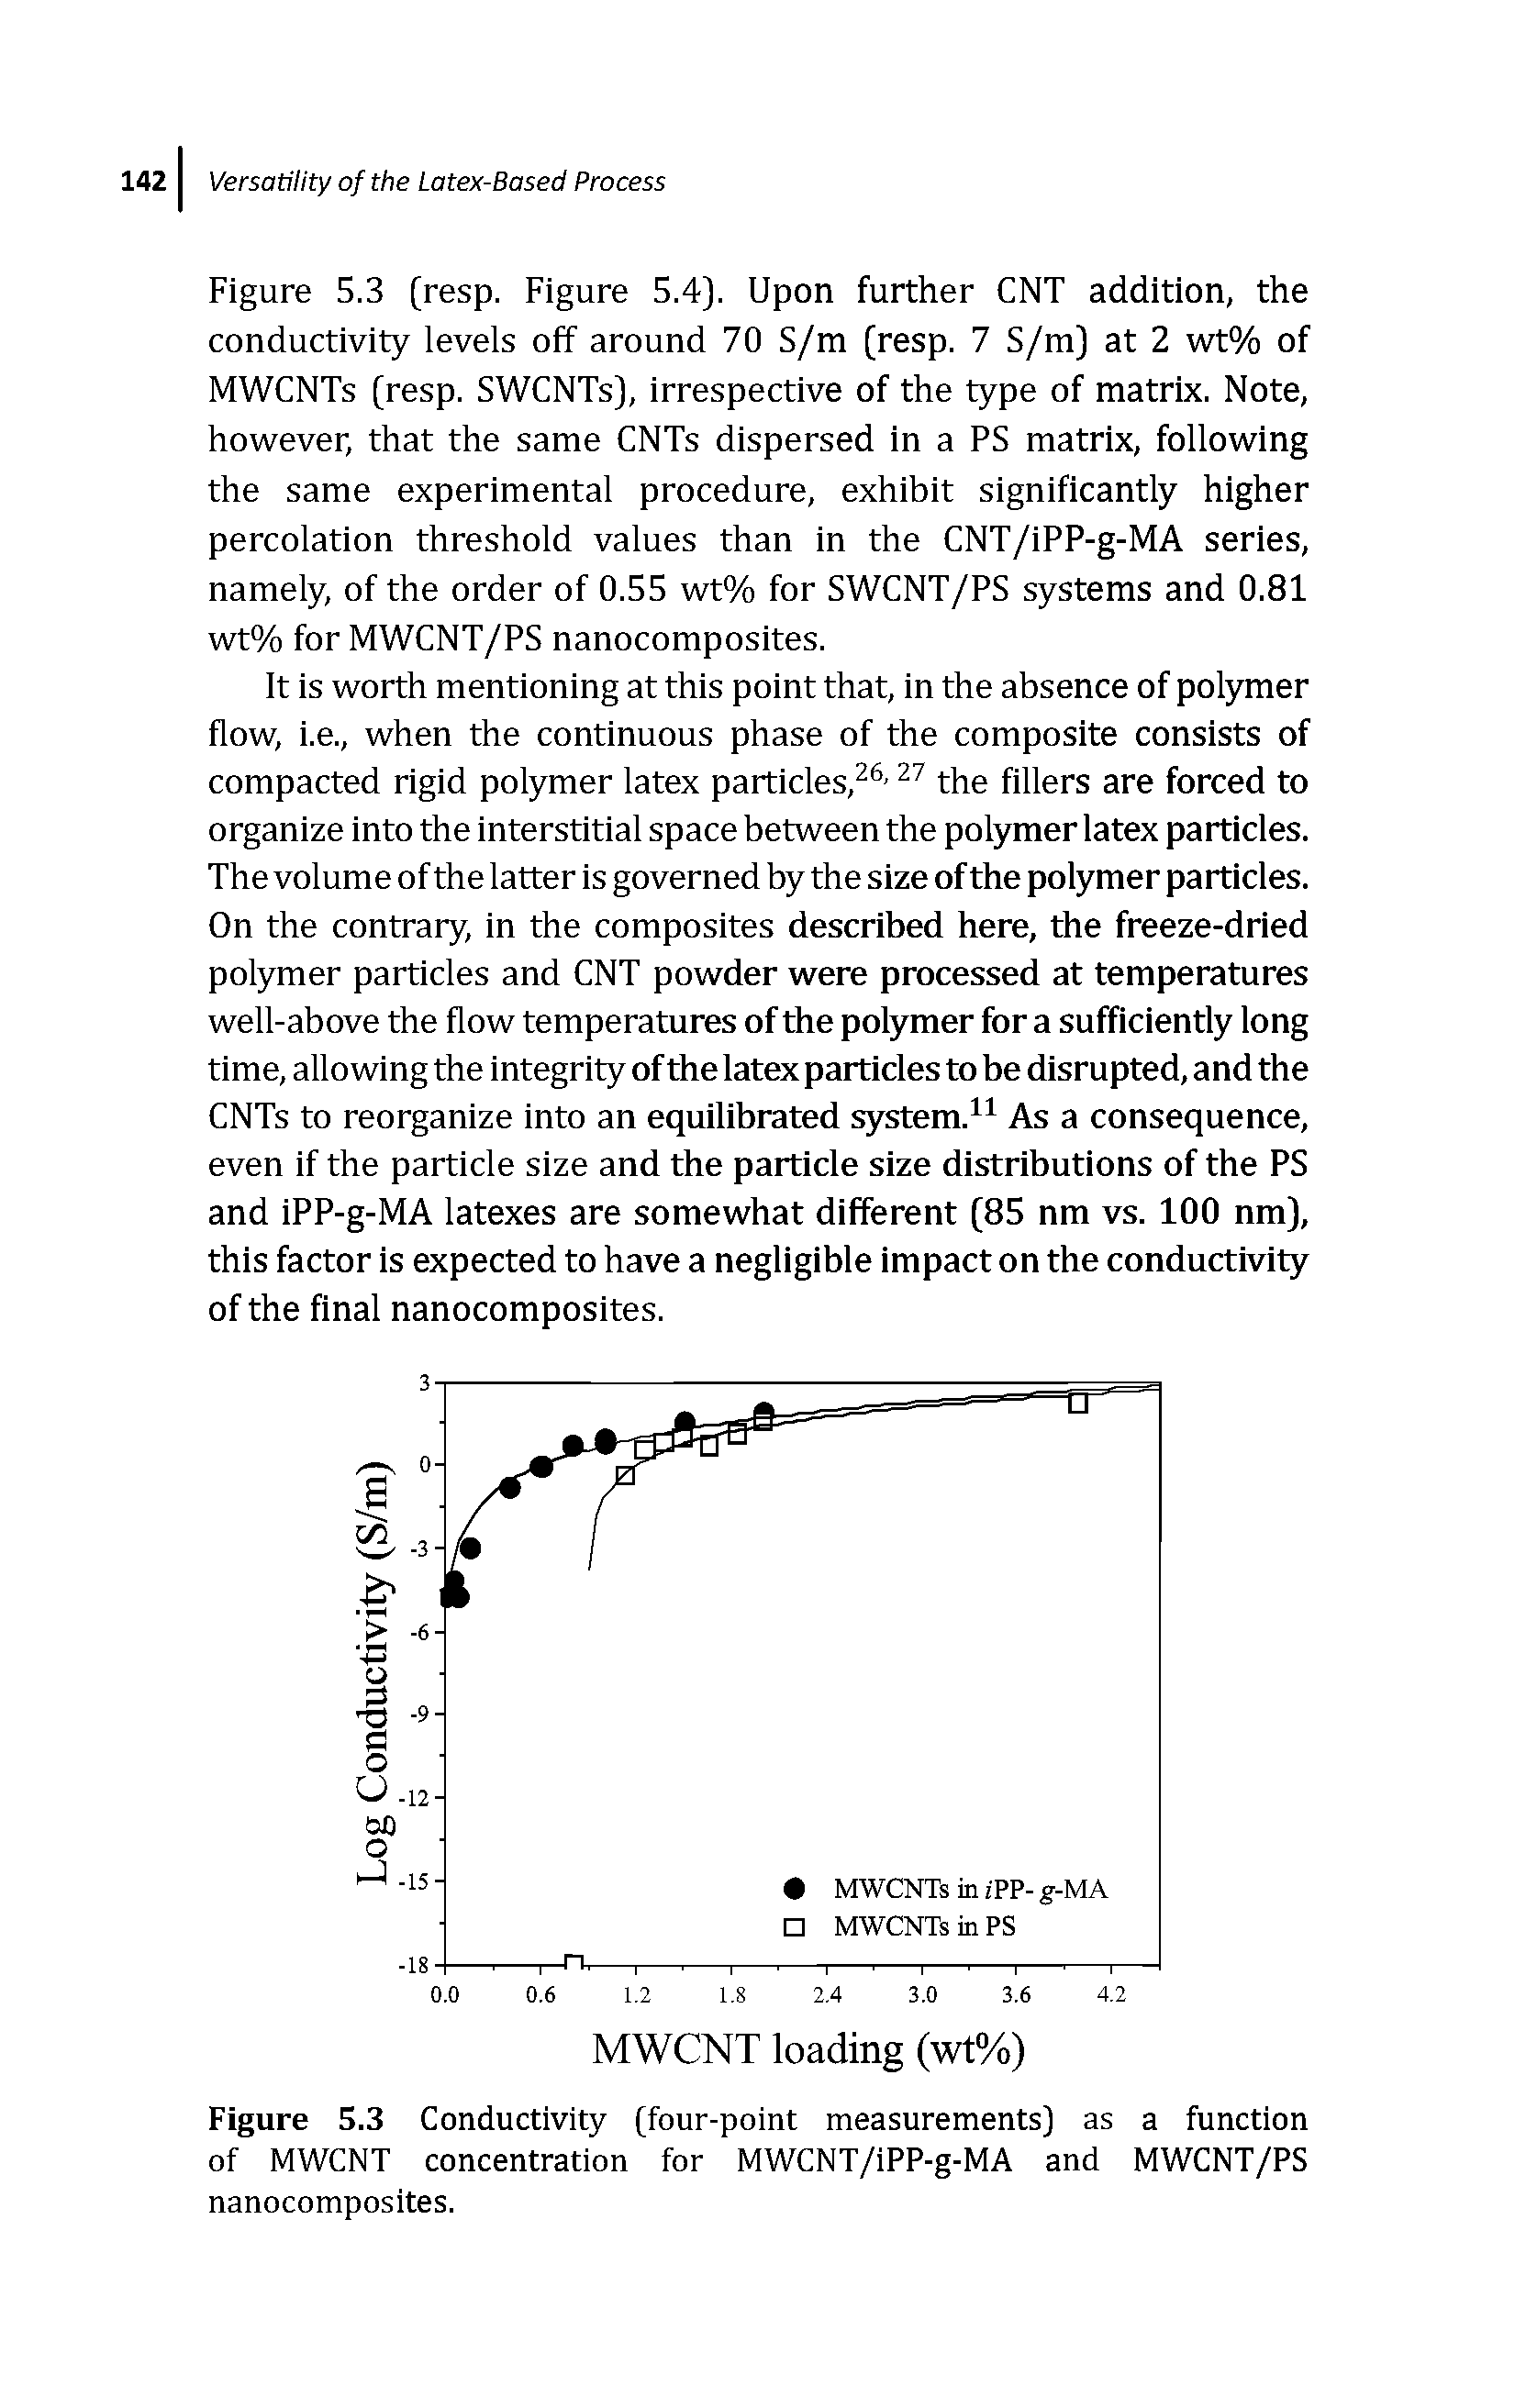 Figure 5.3 [resp. Figure 5.4]. Upon further CNT addition, the conductivity levels off around 70 S/m (resp. 7 S/m] at 2 wt% of MWCNTs (resp. SWCNTs], irrespective of the type of matrix. Note, however, that the same CNTs dispersed in a PS matrix, following the same experimental procedure, exhibit significantly higher percolation threshold values than in the CNT/iPP-g-MA series, namely, of the order of 0.55 wt% for SWCNT/PS systems and 0.81 wt% for MWCNT/PS nanocomposites.